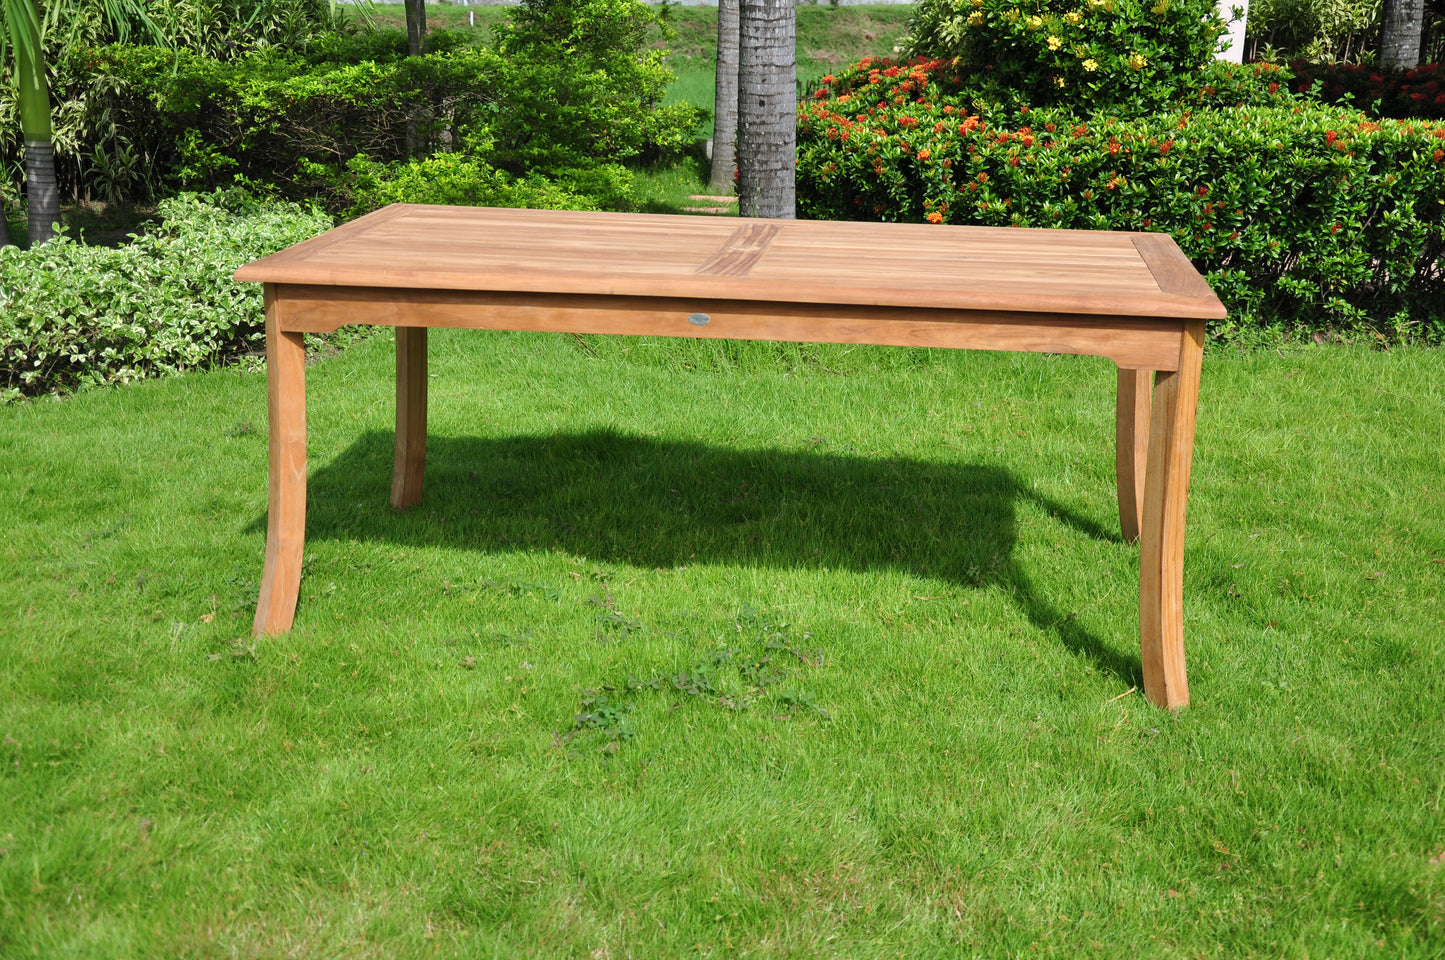 71" Fixed Rectangle Dining Table